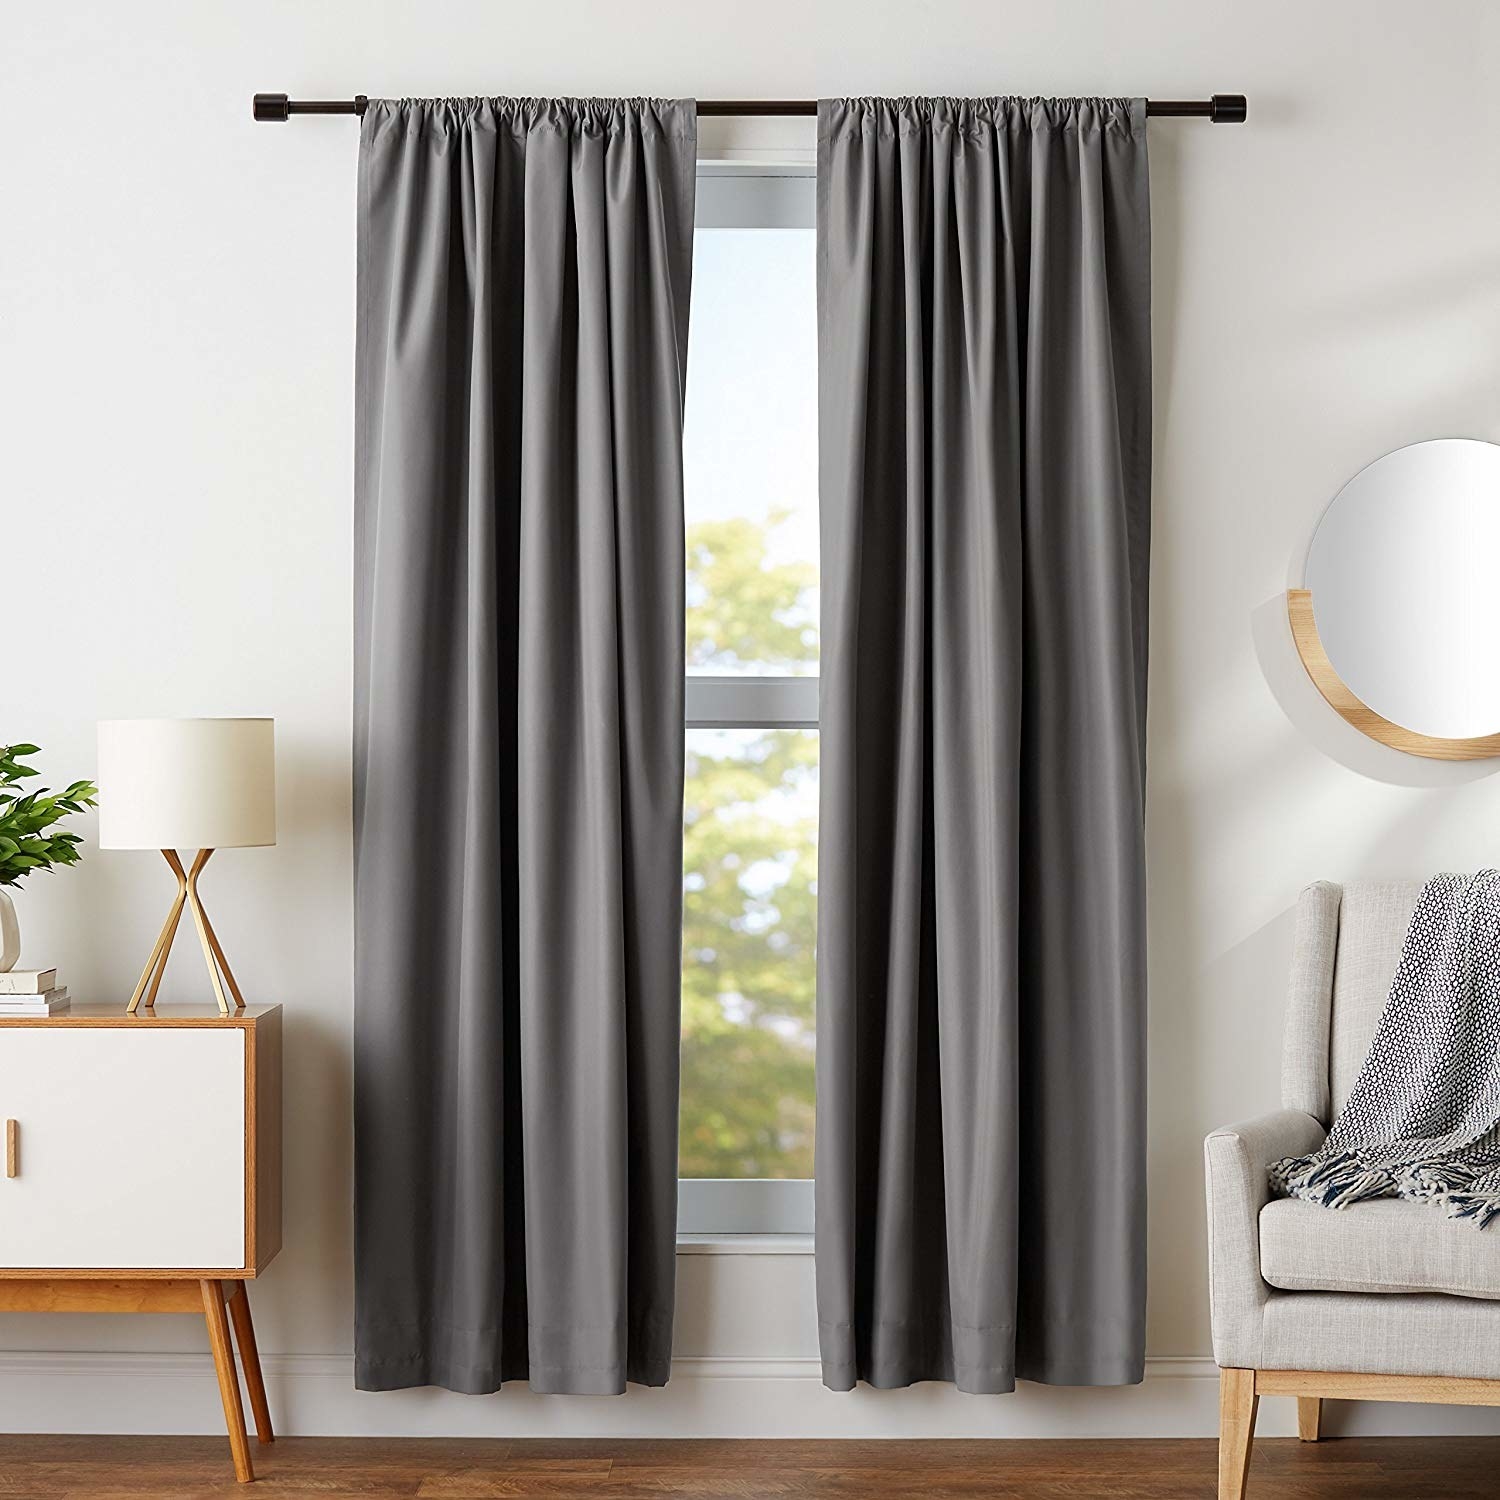 The blackout curtains displayed in a window